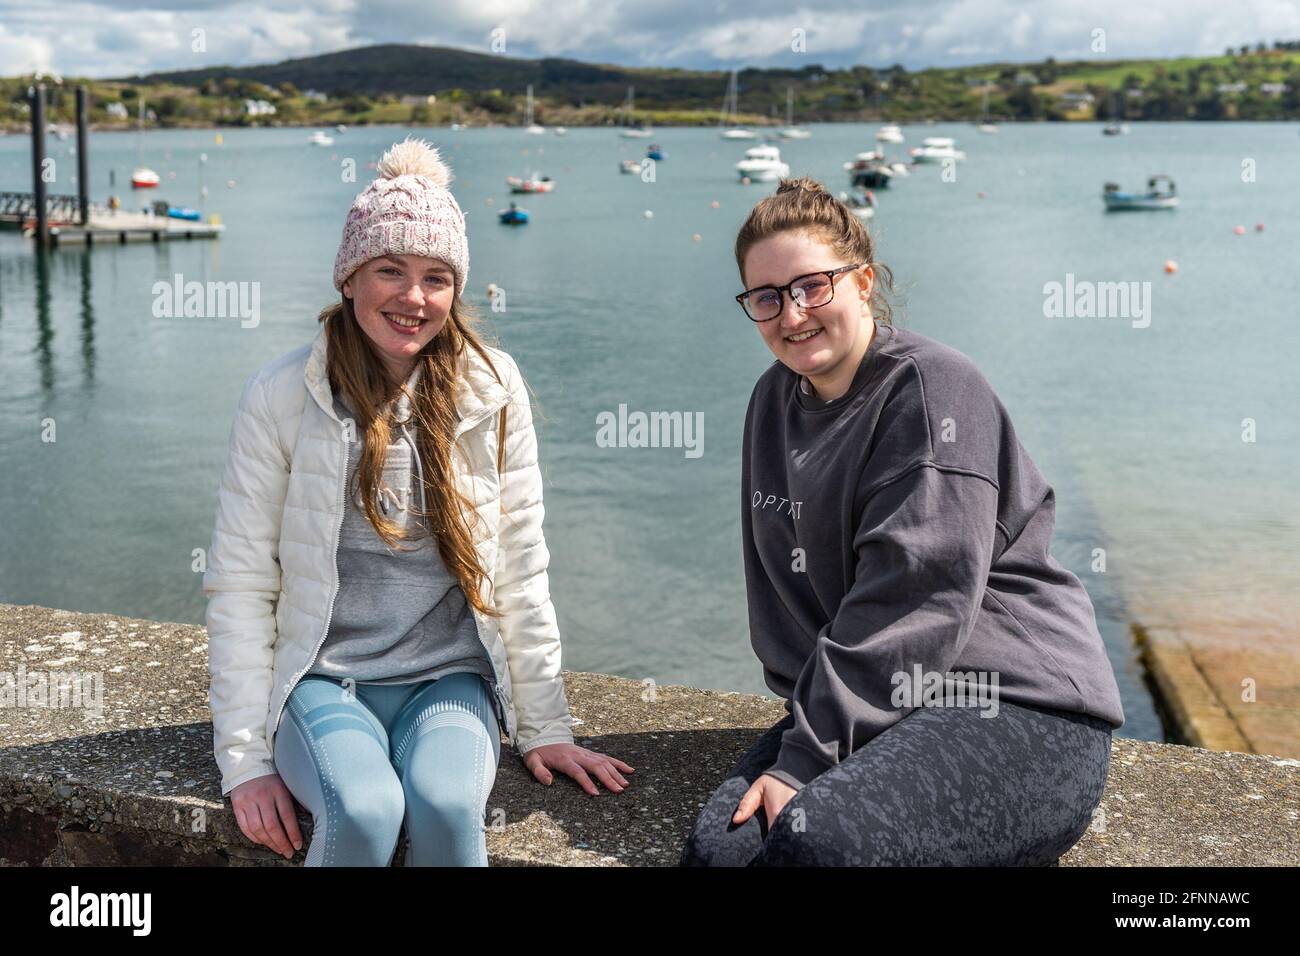 Schull, West Cork, Ireland. 18th May, 2021. The sun shone on Schull today which prompted many locals and visitors to make the most of the nice weather before the rain arrives over the next few days. Enjoying the sunshine on Schull Pier were Anna O'Regan and Ciara Goggin from Schull. Credit: AG News/Alamy Live News Stock Photo